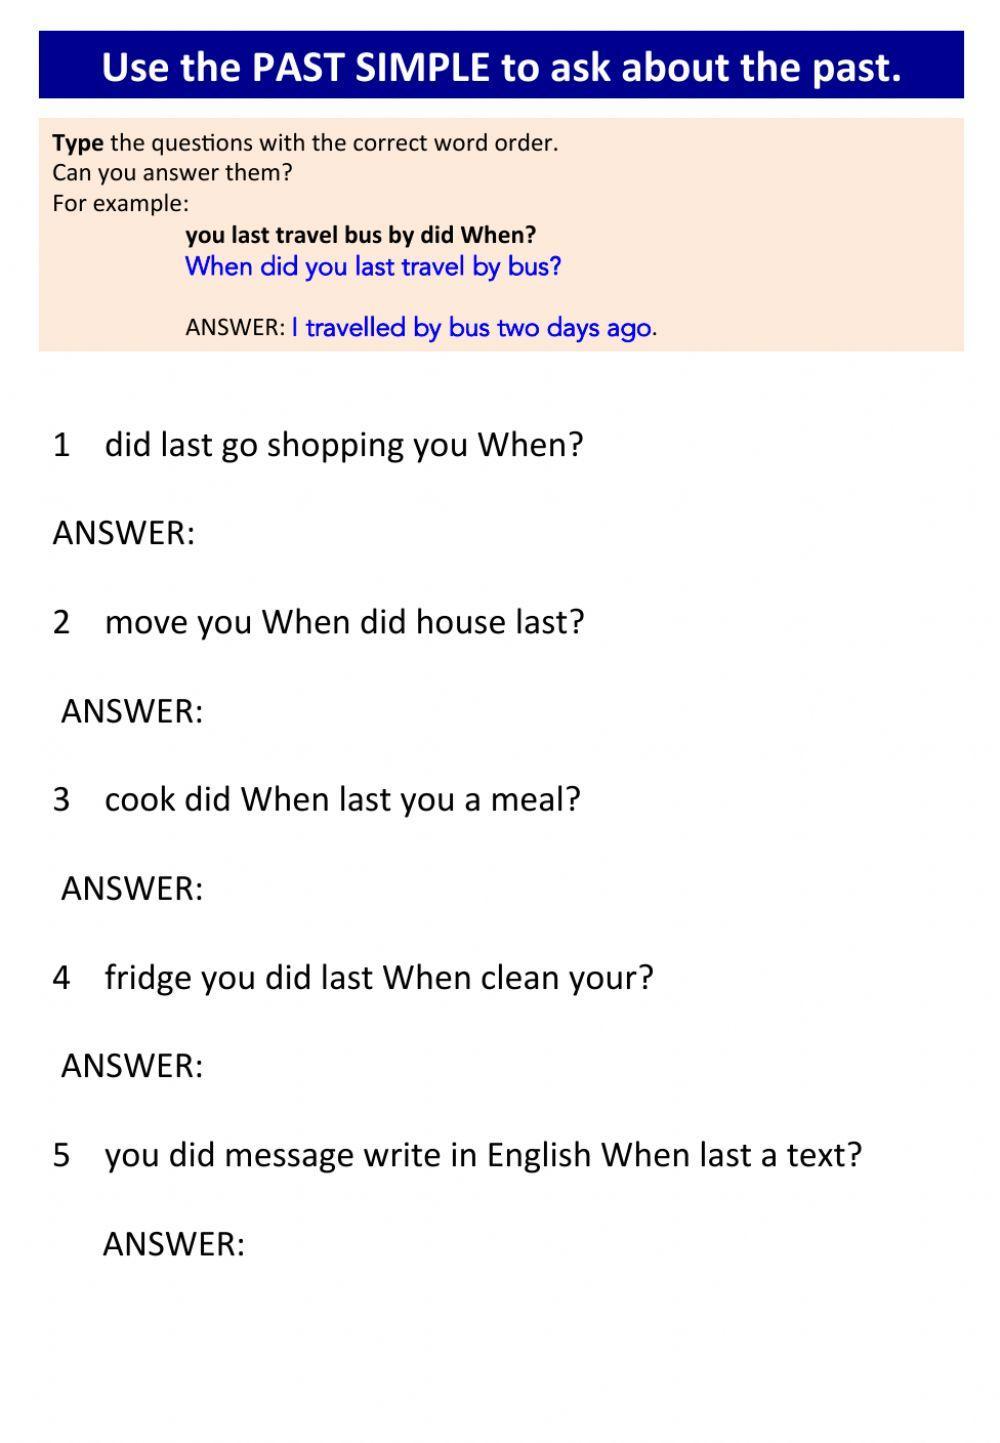 Word order for PAST SIMPLE questions